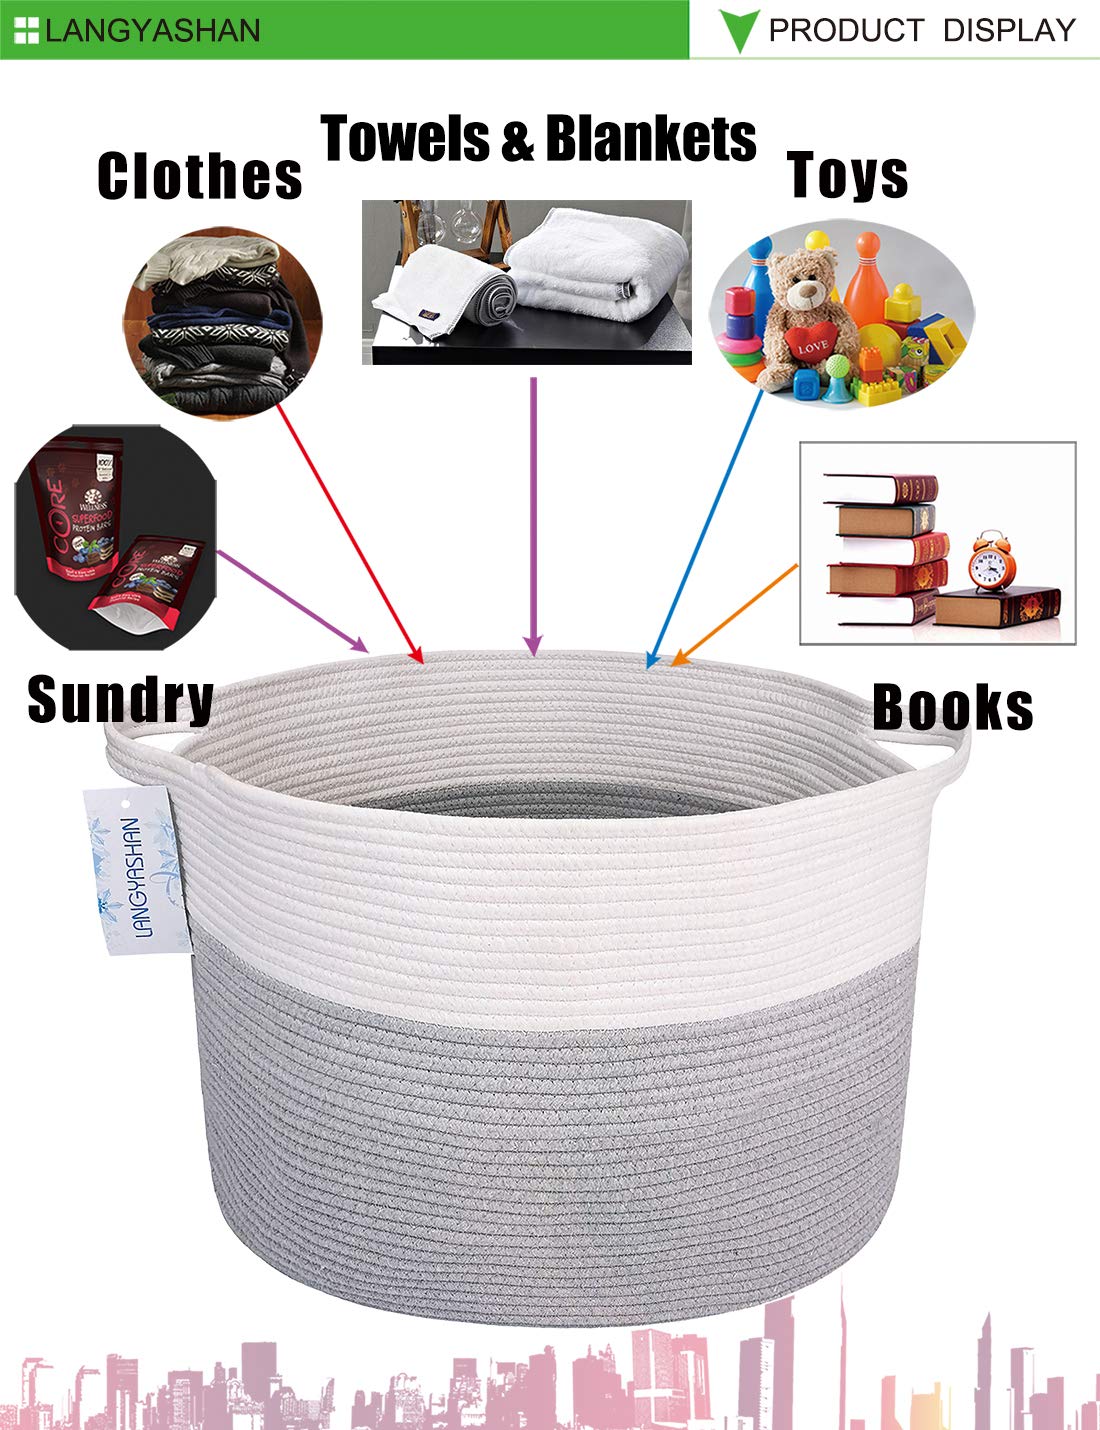 LANGYASHAN 21.65" x 13.78" XXXLarge Woven Rope Basket Decorative Blanket Basket for Living Room Toys Sofa Throws Storage Towels or Nursery Round Laundry Hamper Basket with Handles Laundry Basket(Gray)